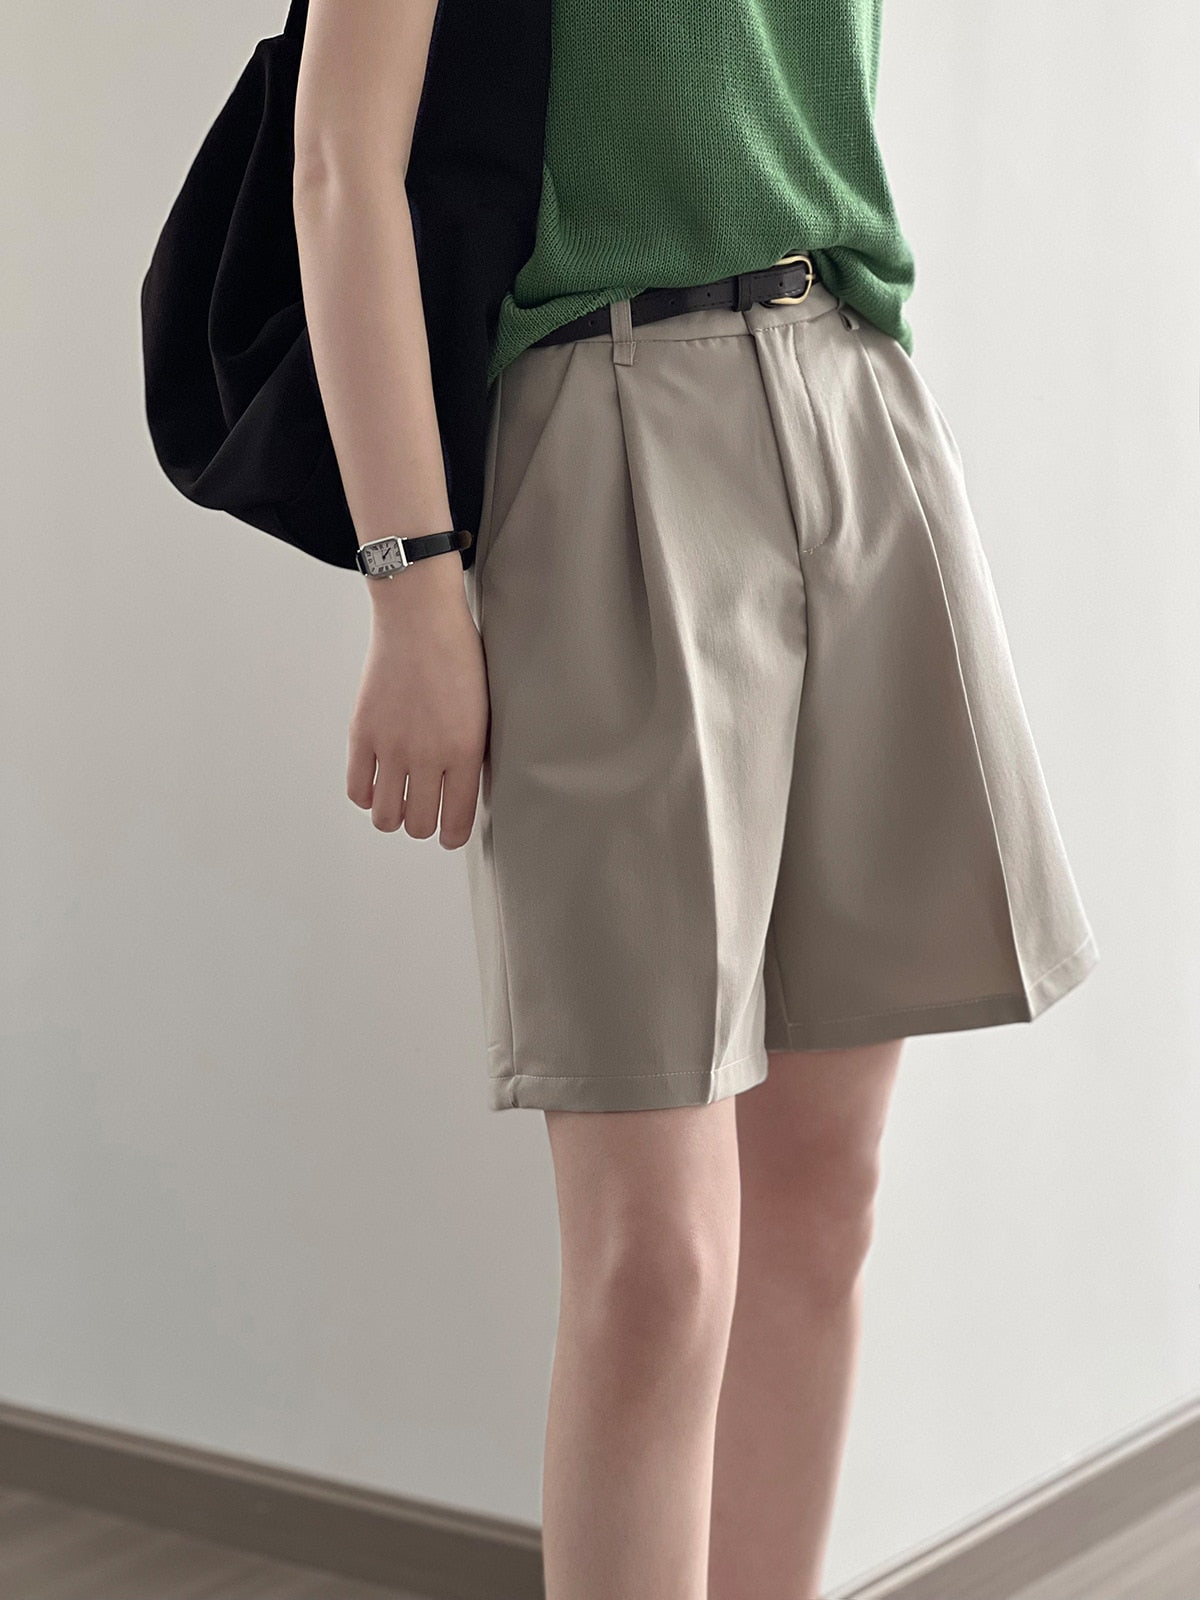 [Korean Style] Solid Color Pleated Dress-up Bermuda Shorts